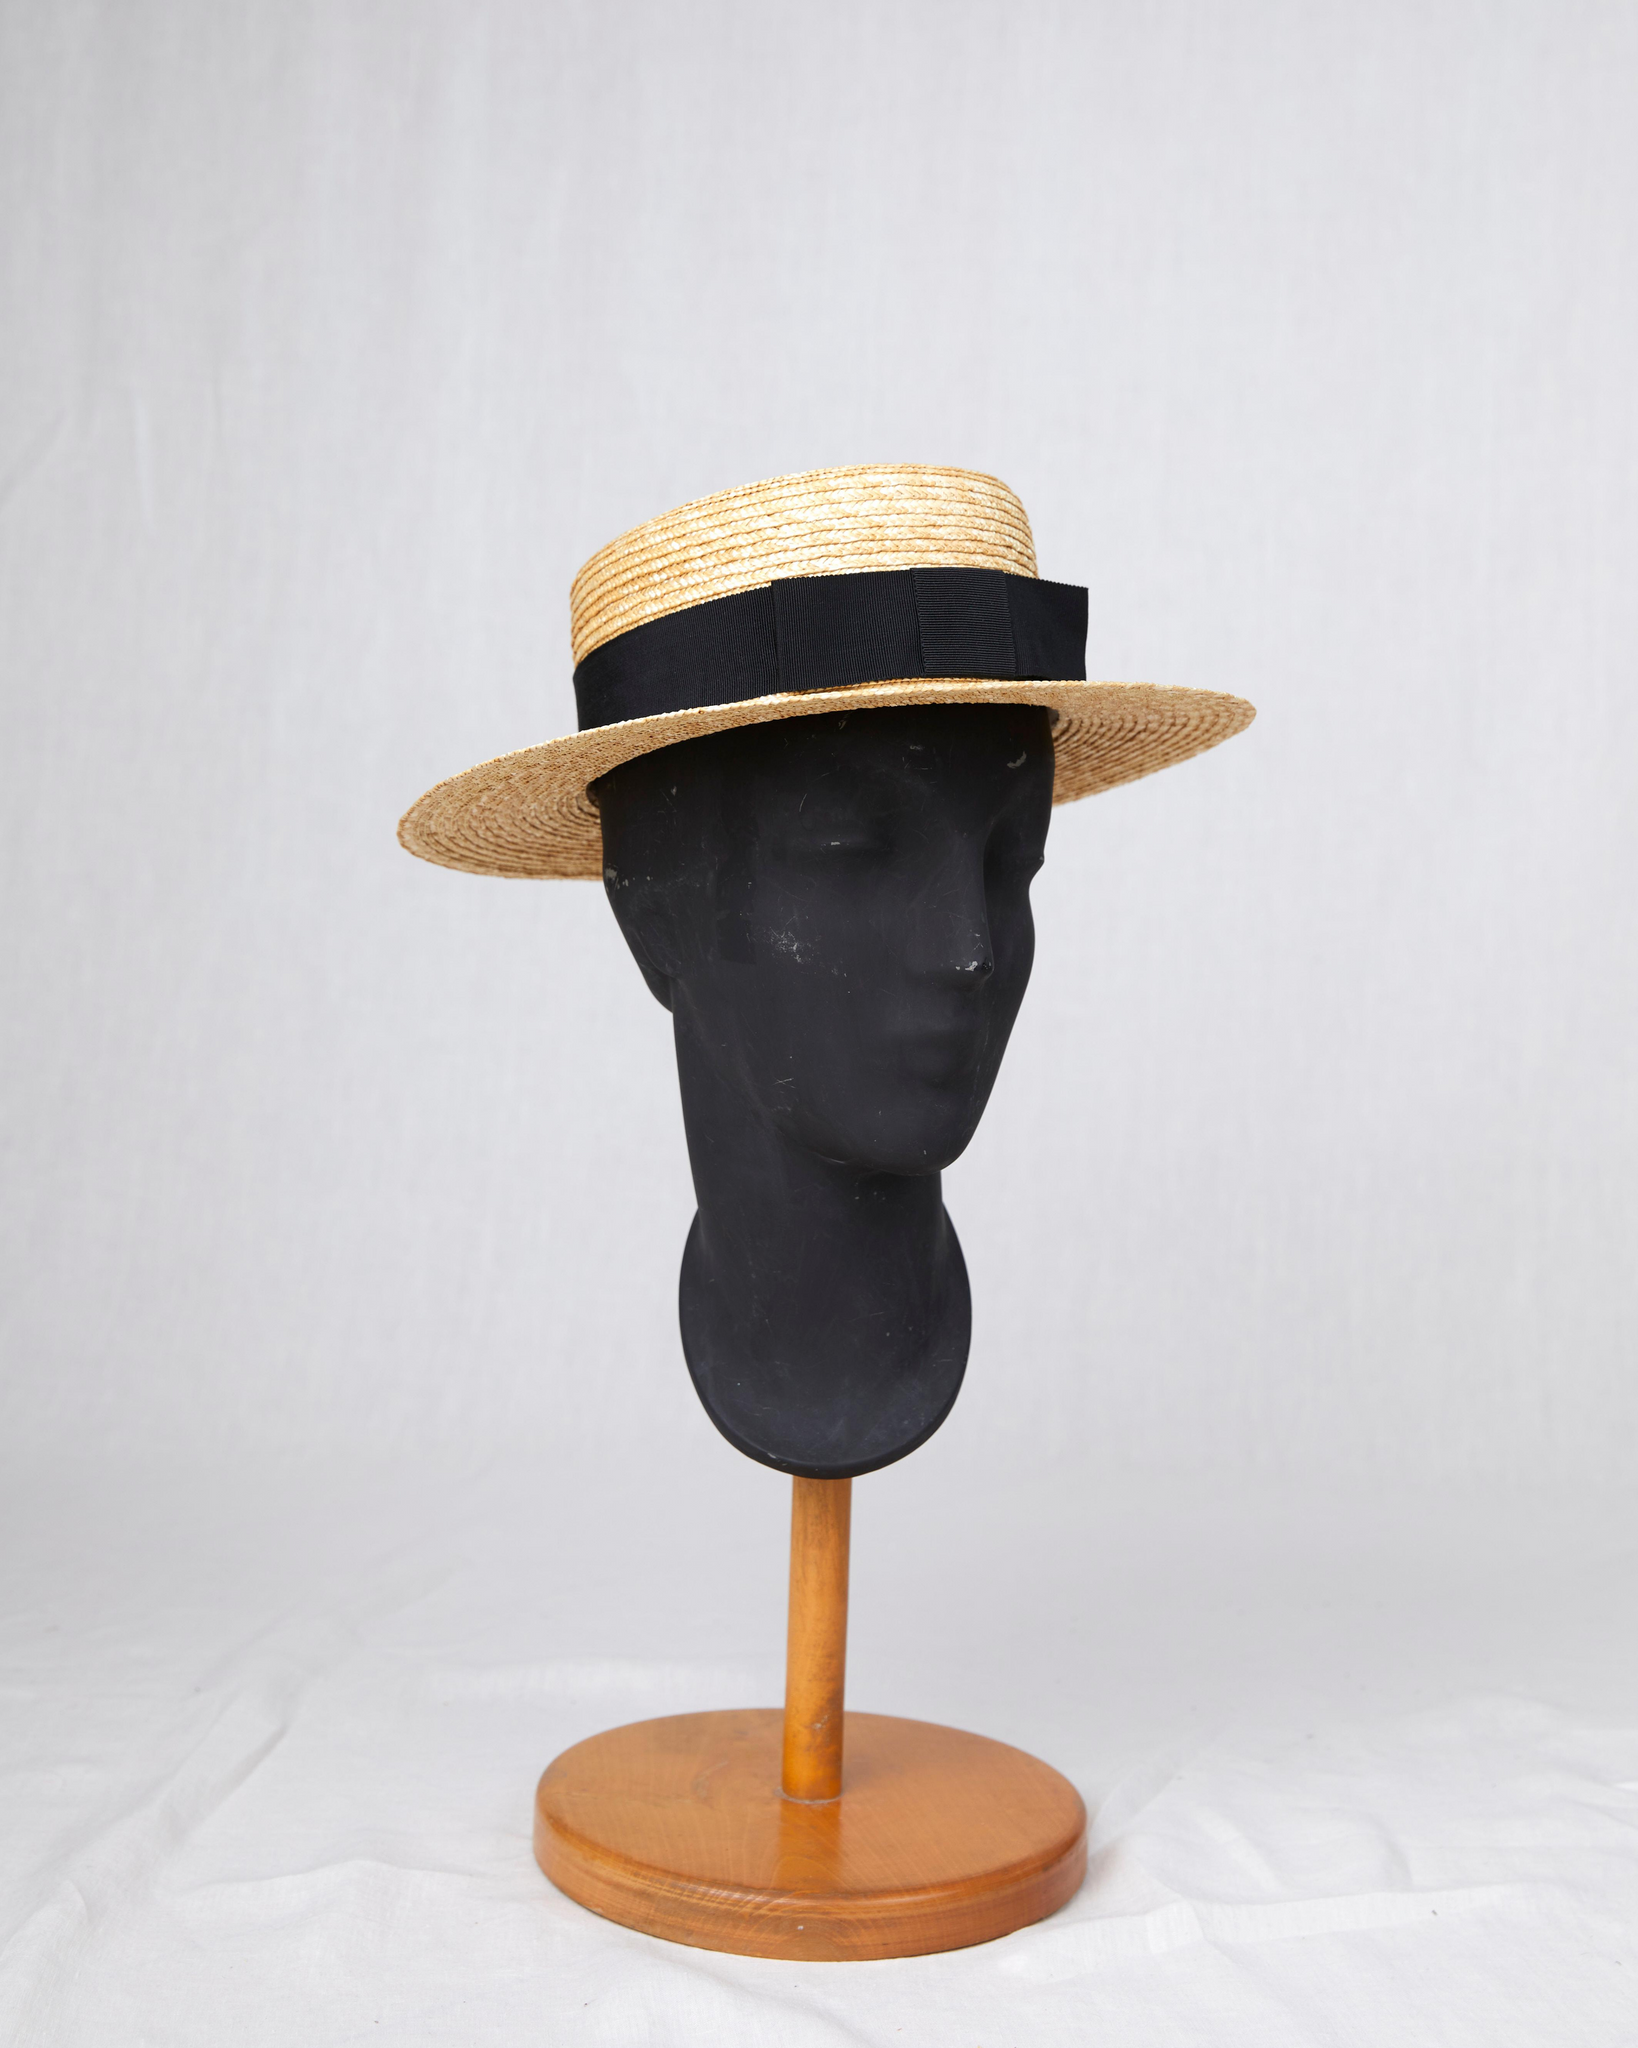 HEADQUARTER | couture headwear Canotier. Classical hat shape made of wheat straw braids sewn by hand. Designed and handcrafted in Switzerland.